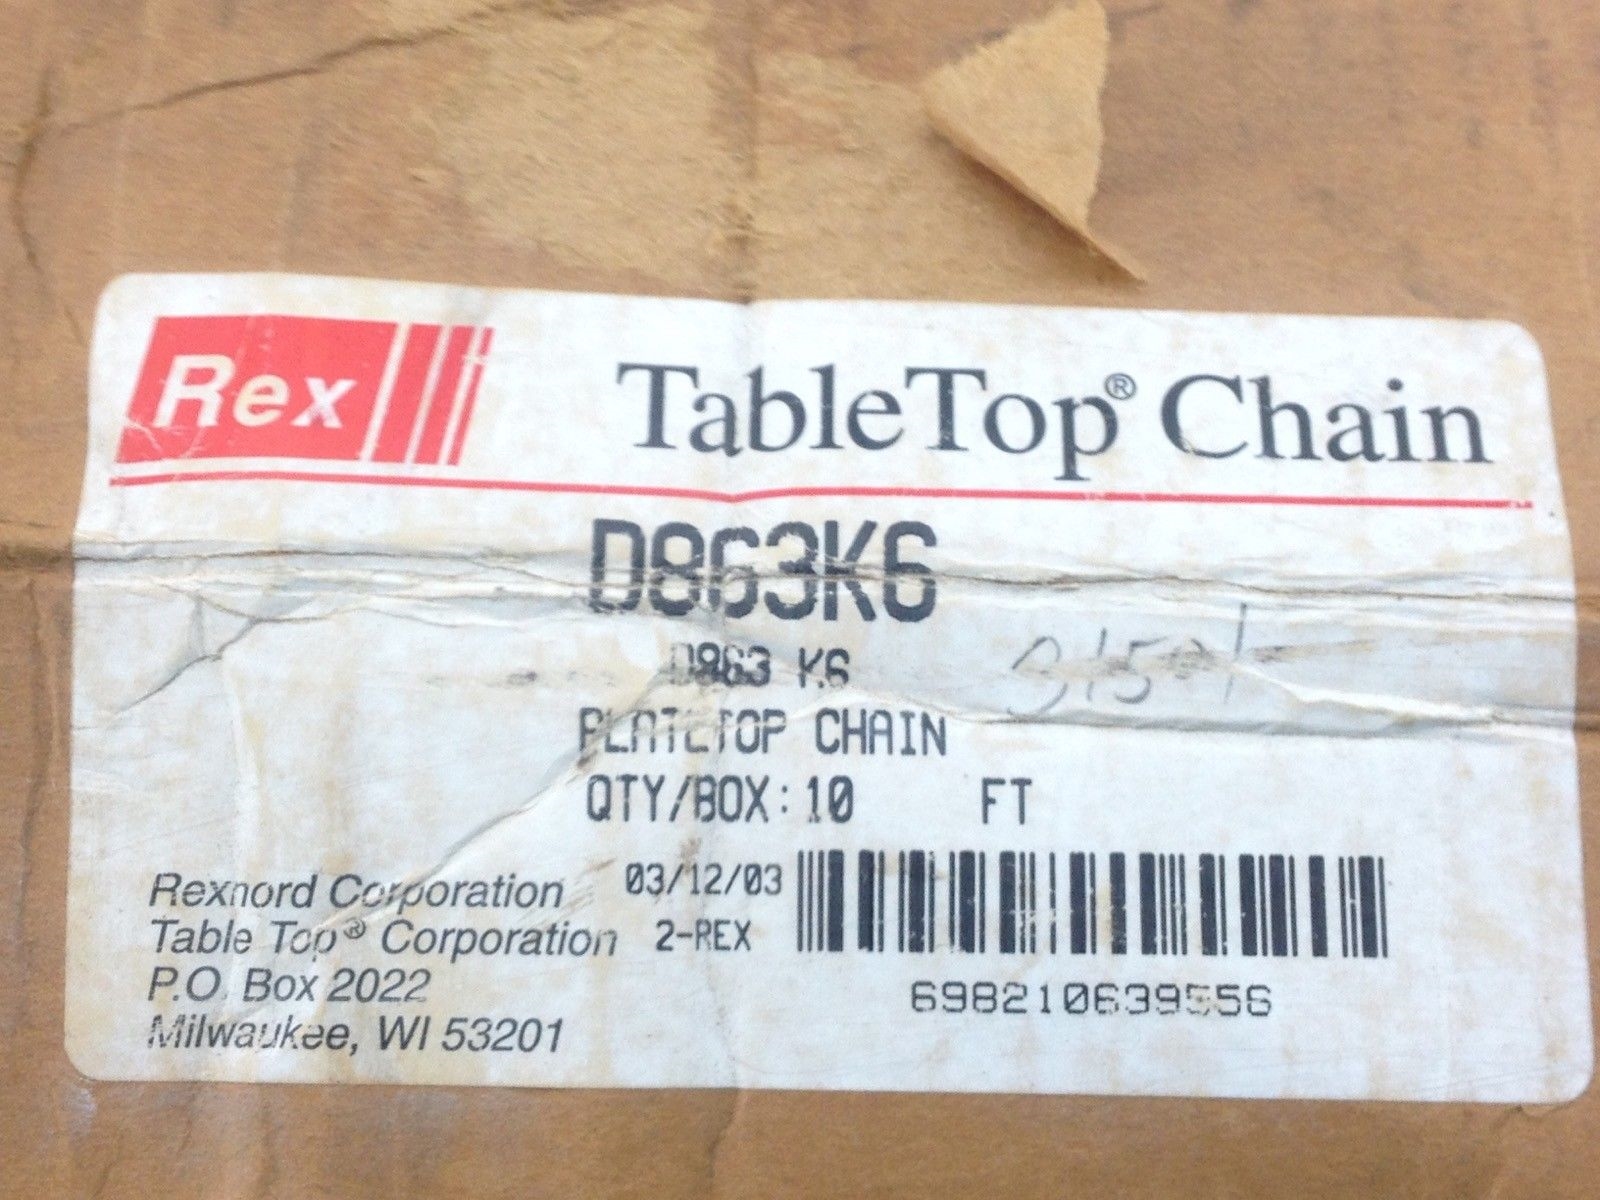 REXNORD TABLE TOP CHAIN D863K6 PLATE TOP CHAIN 10FT (TOL) 2